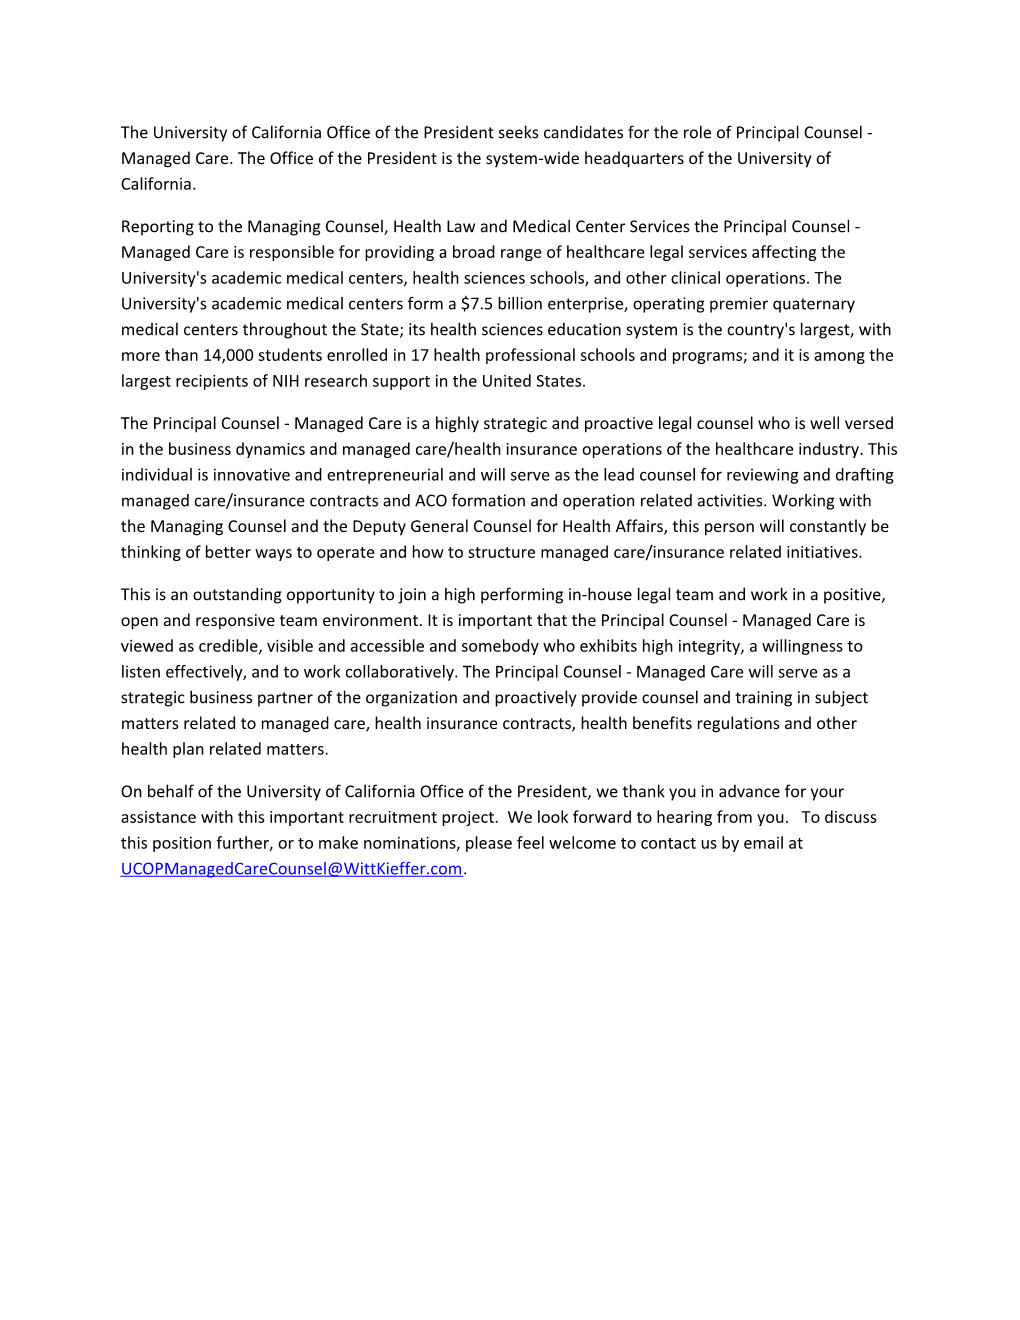 The University of California Office of the President Seeks Candidates for the Role of Principal